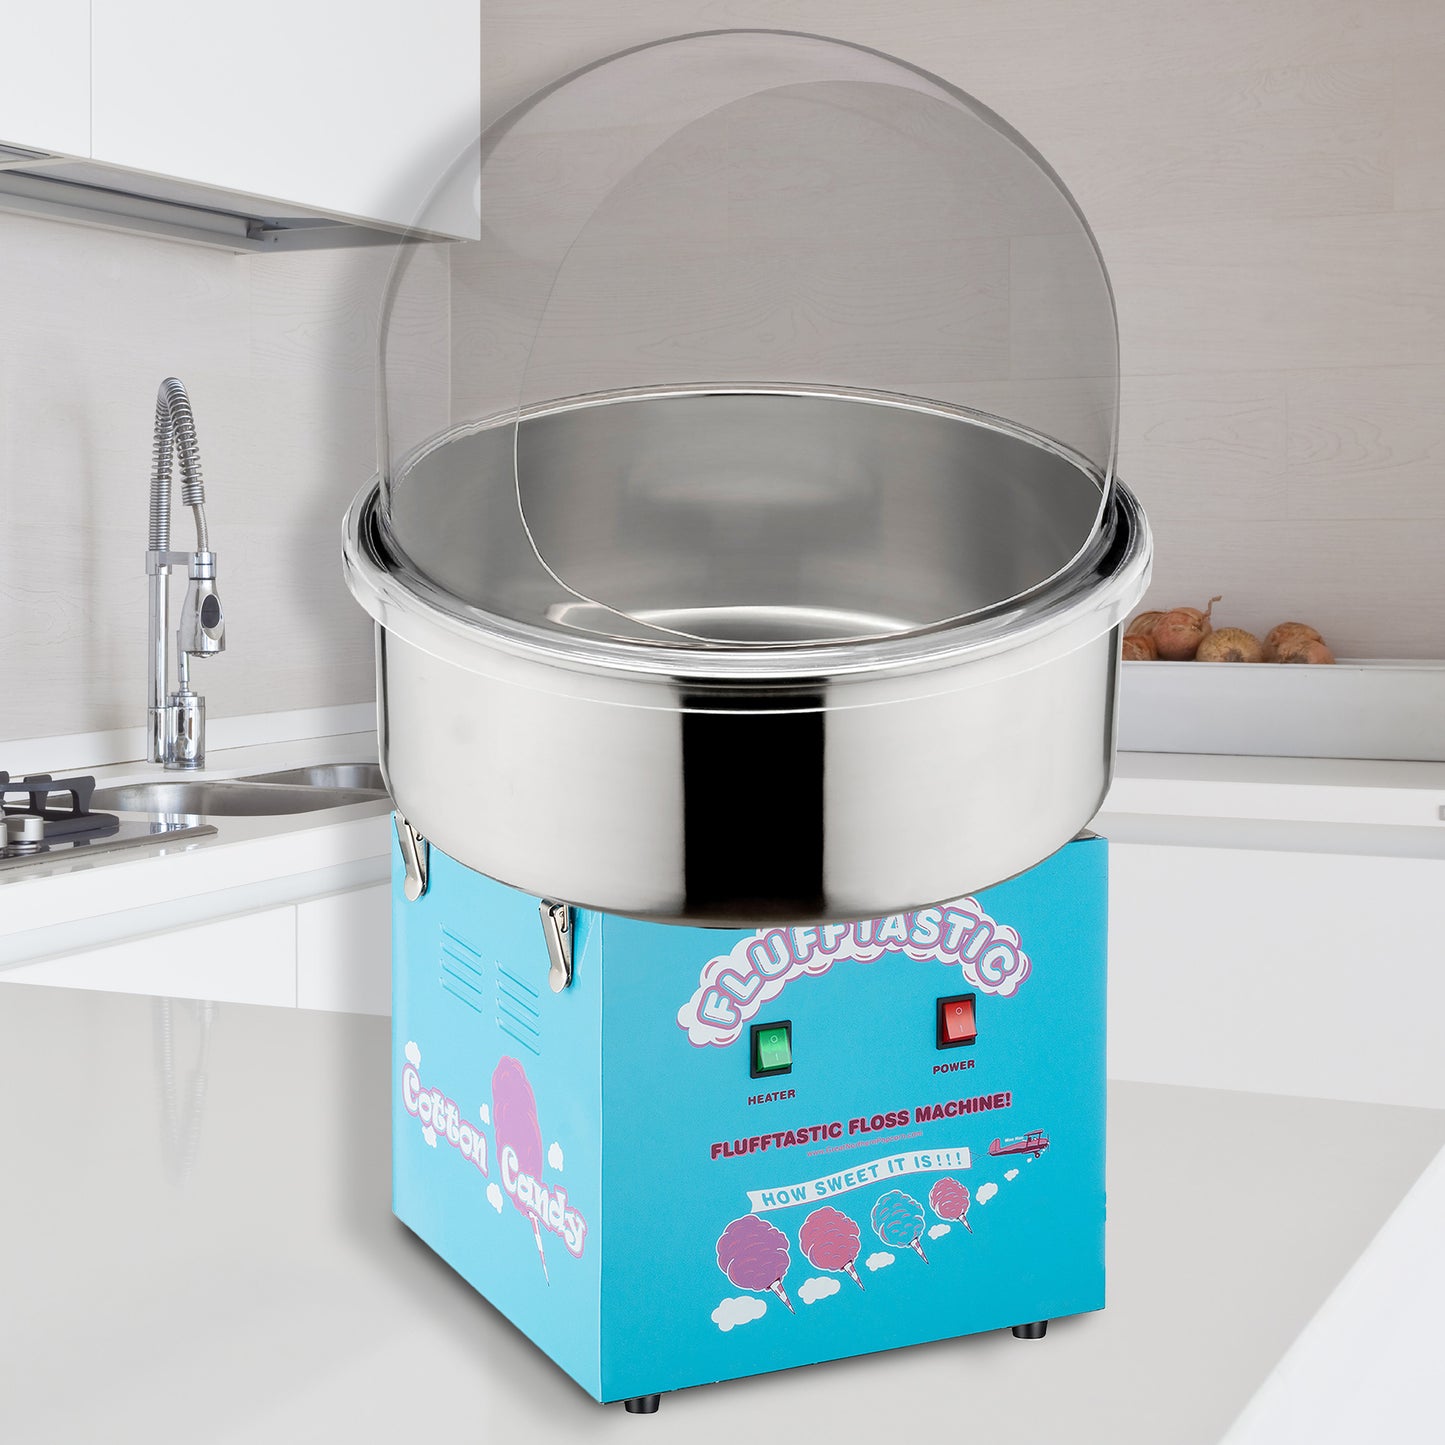 Flufftastic Cotton Candy Machine with Bubble Shield - Blue